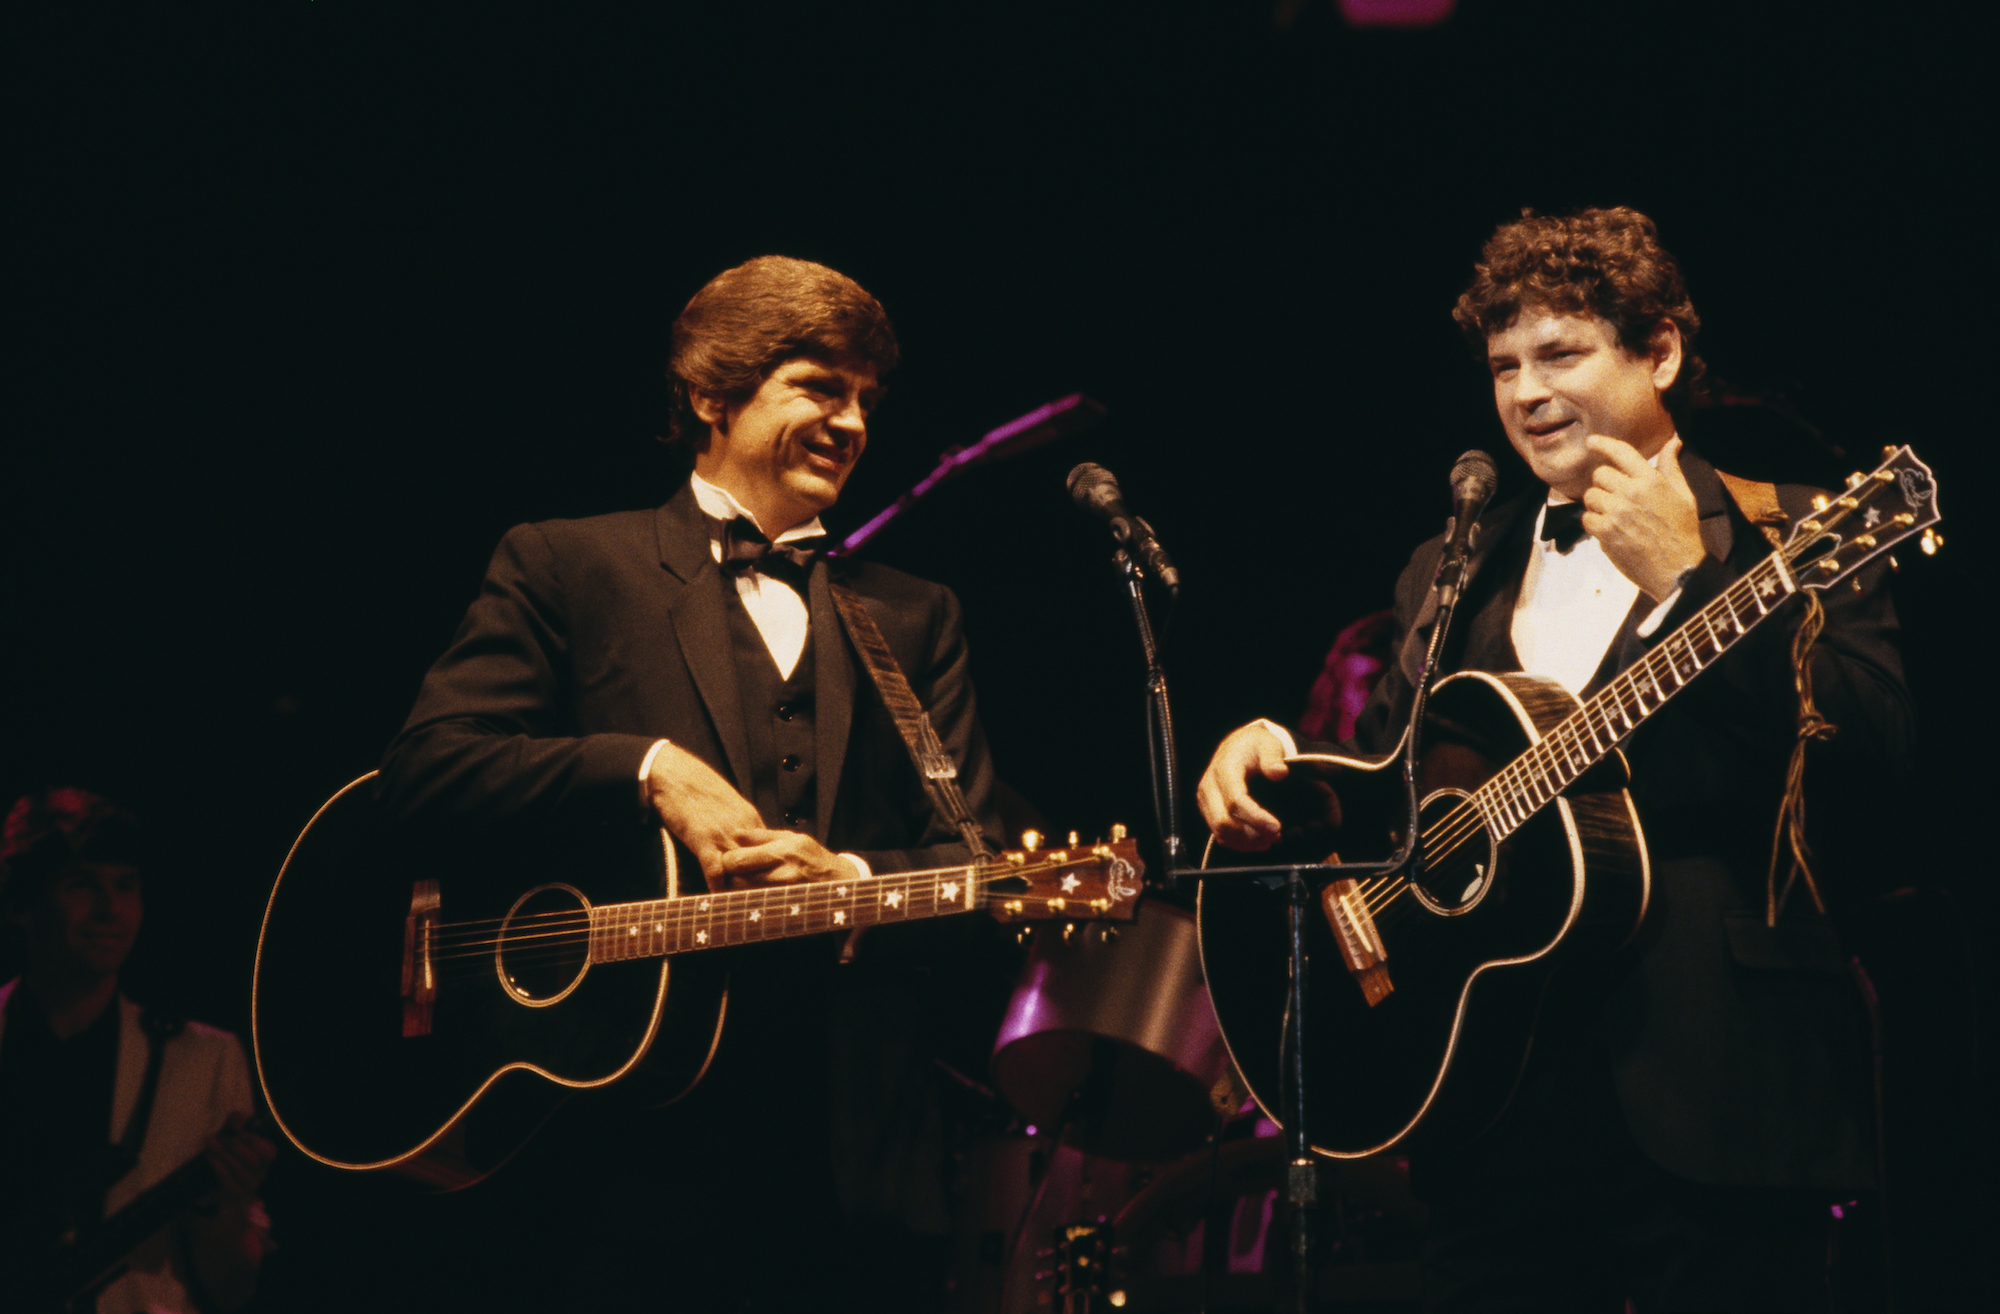 (L-R) Phil and Don Everly performing on stage